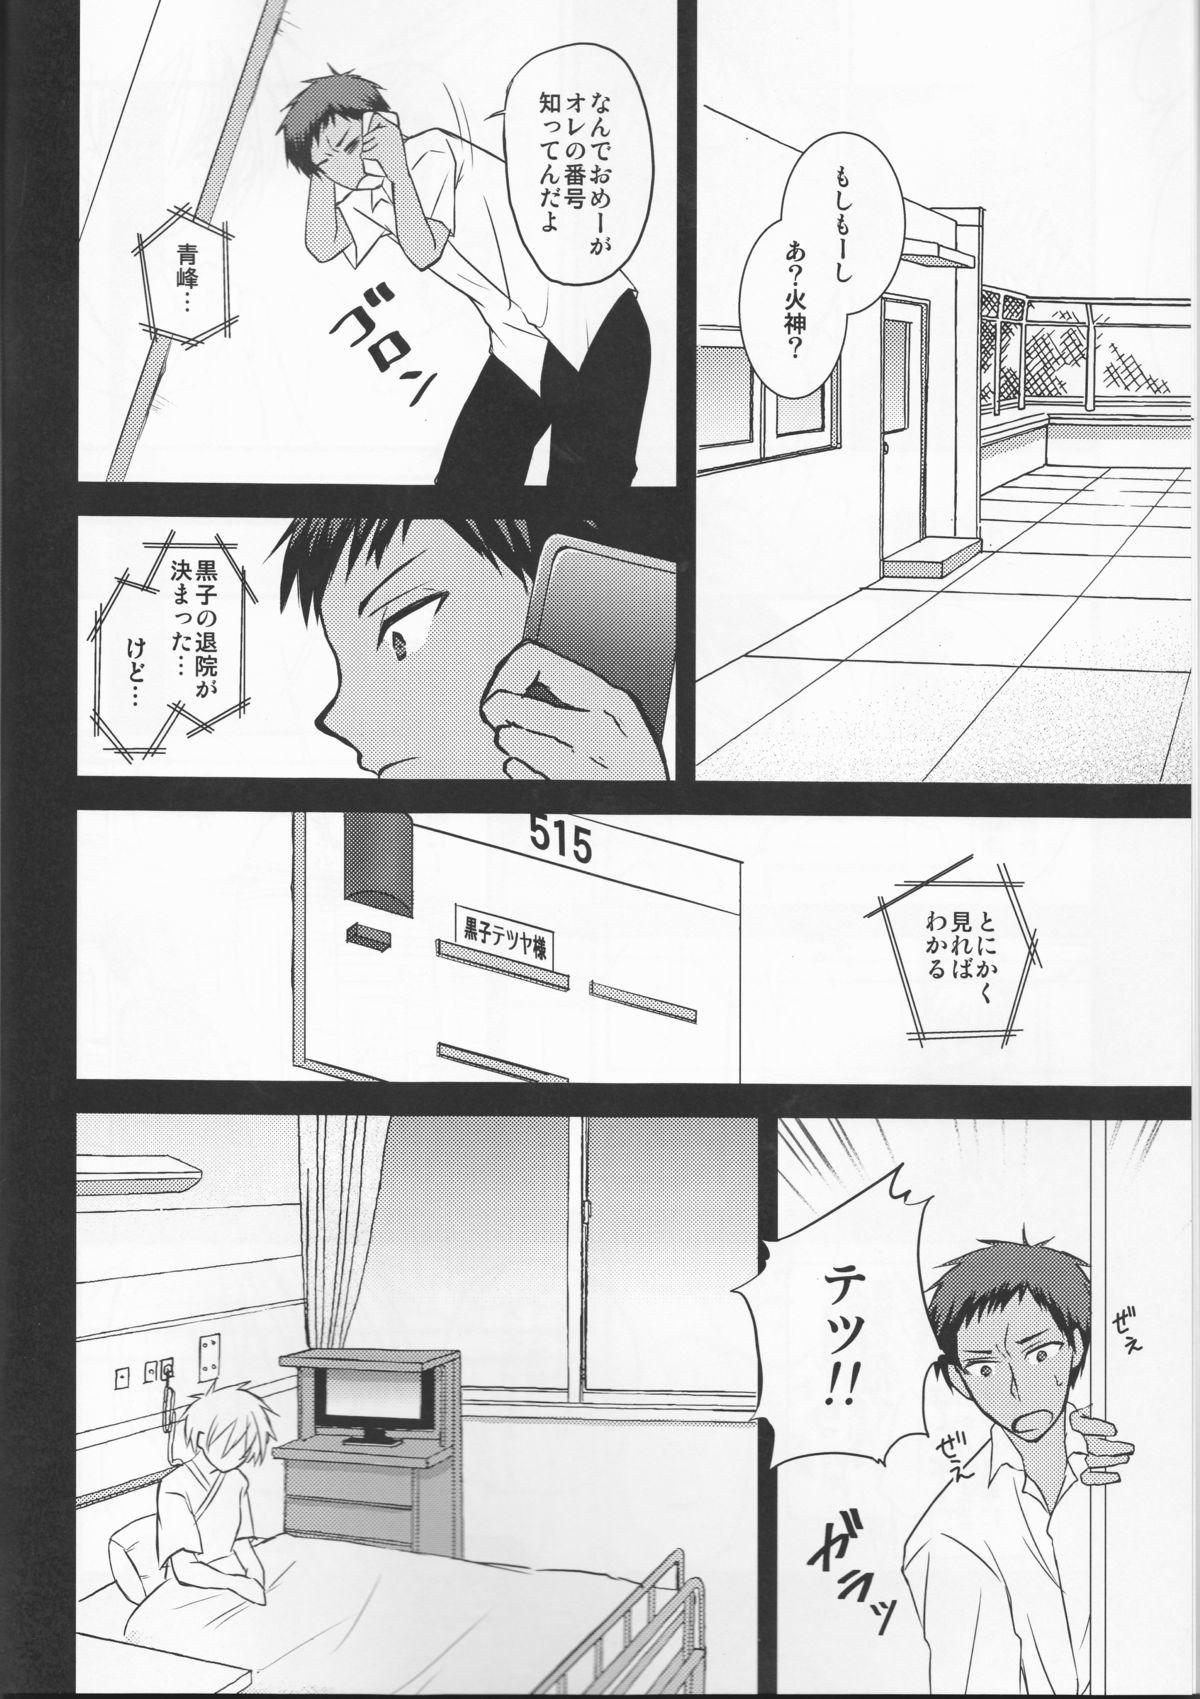 Watersports Yesterday of his and her tomorrow - Kuroko no basuke Pawg - Page 6